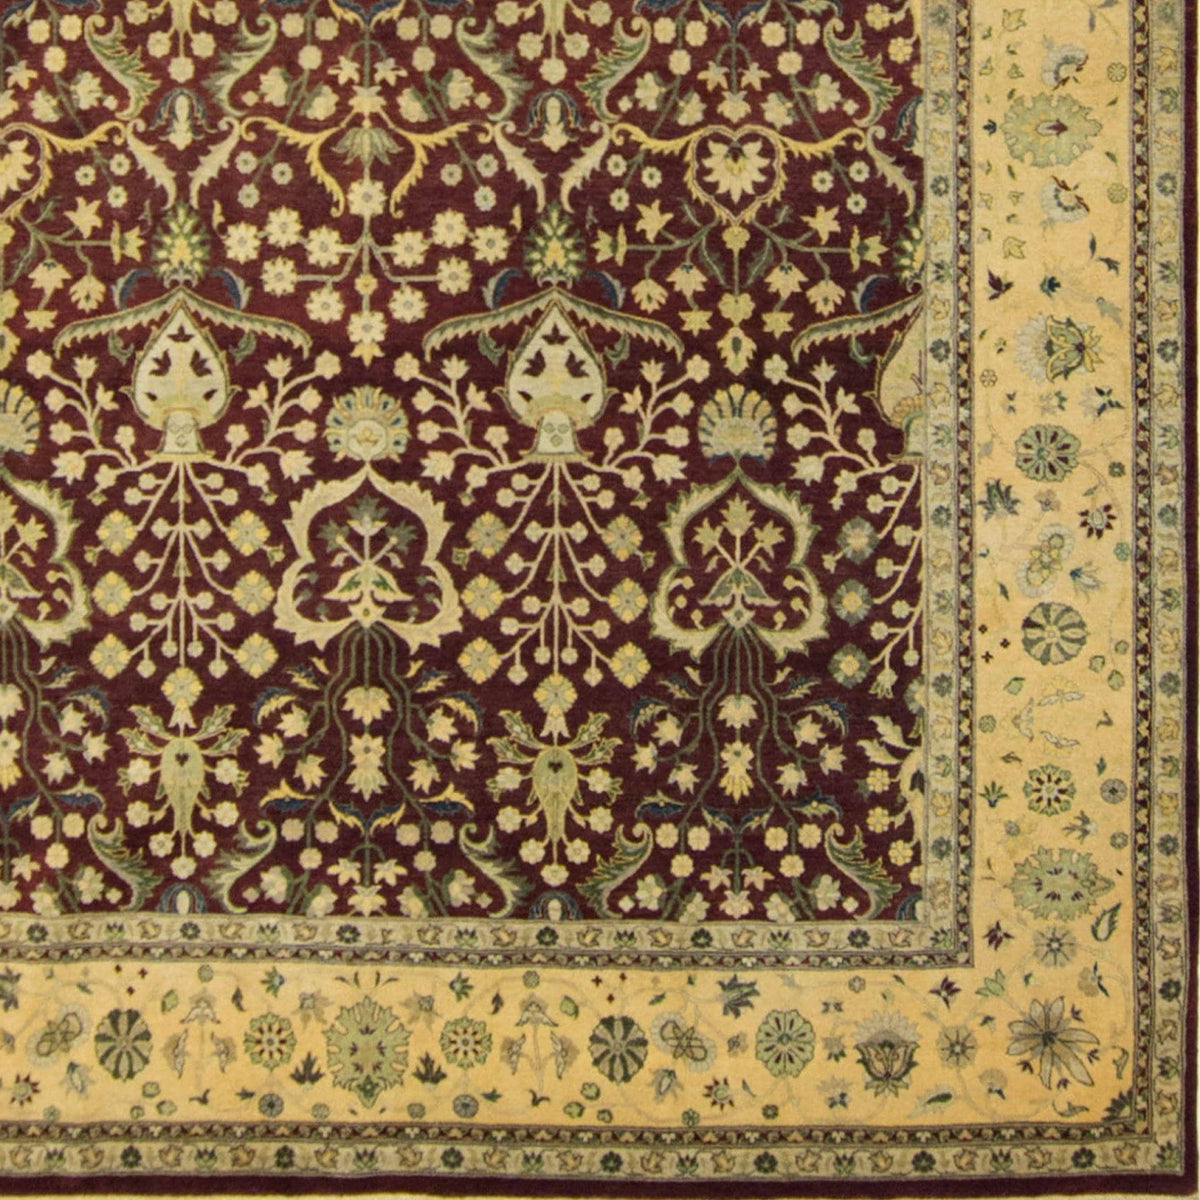 Fine Hand-knotted Wool Persian Rug 249cm x 320cm